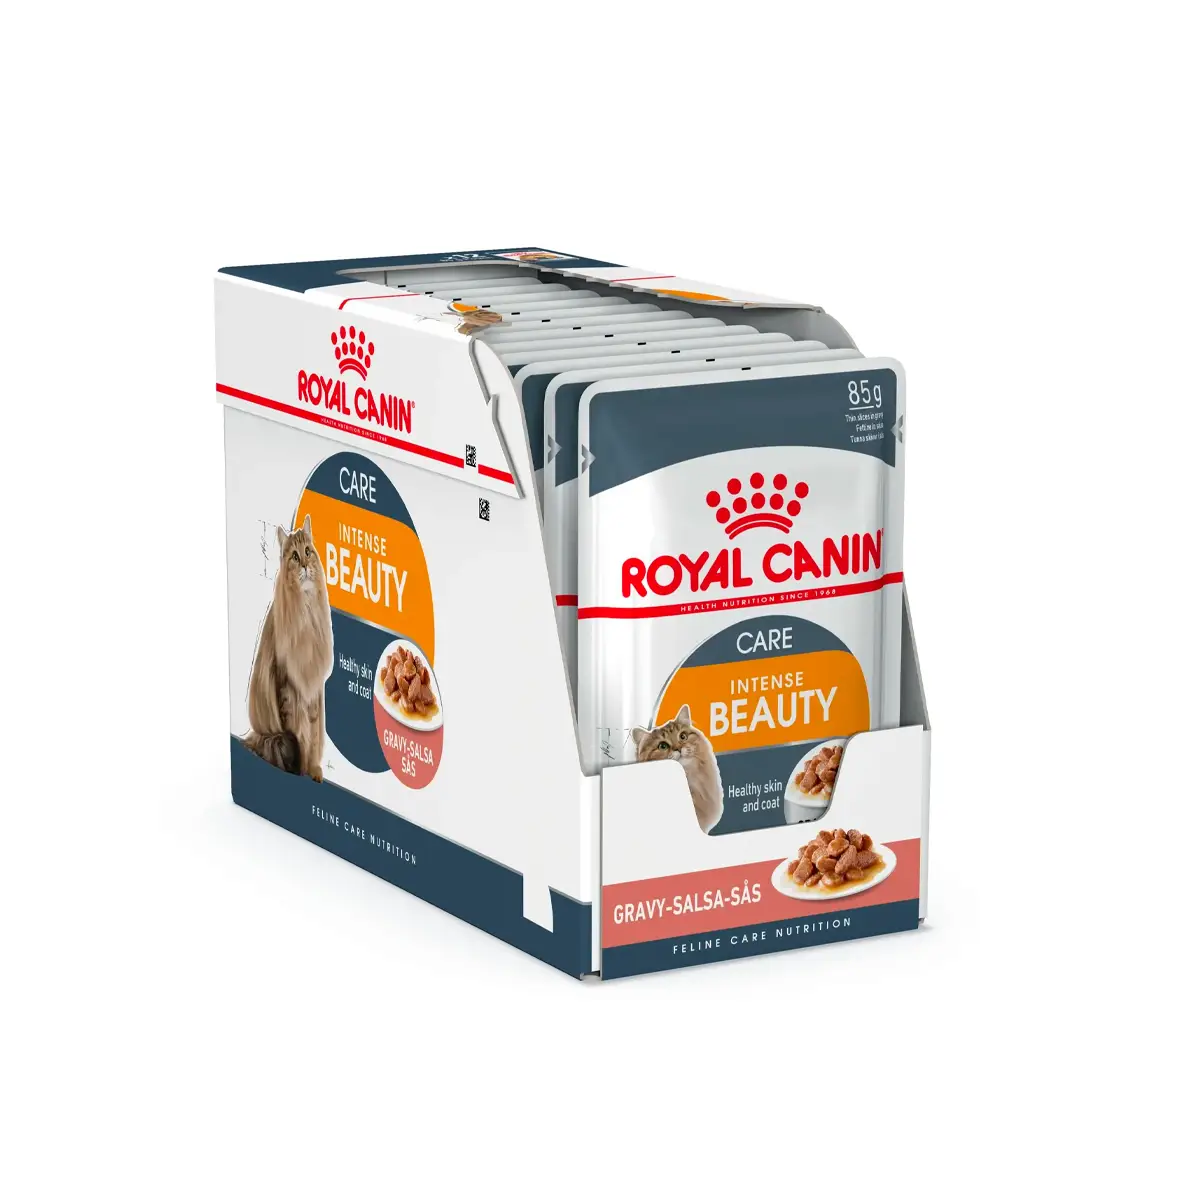 Royal Canin - Care Intense Beauty Wet Food In Gravy 85g